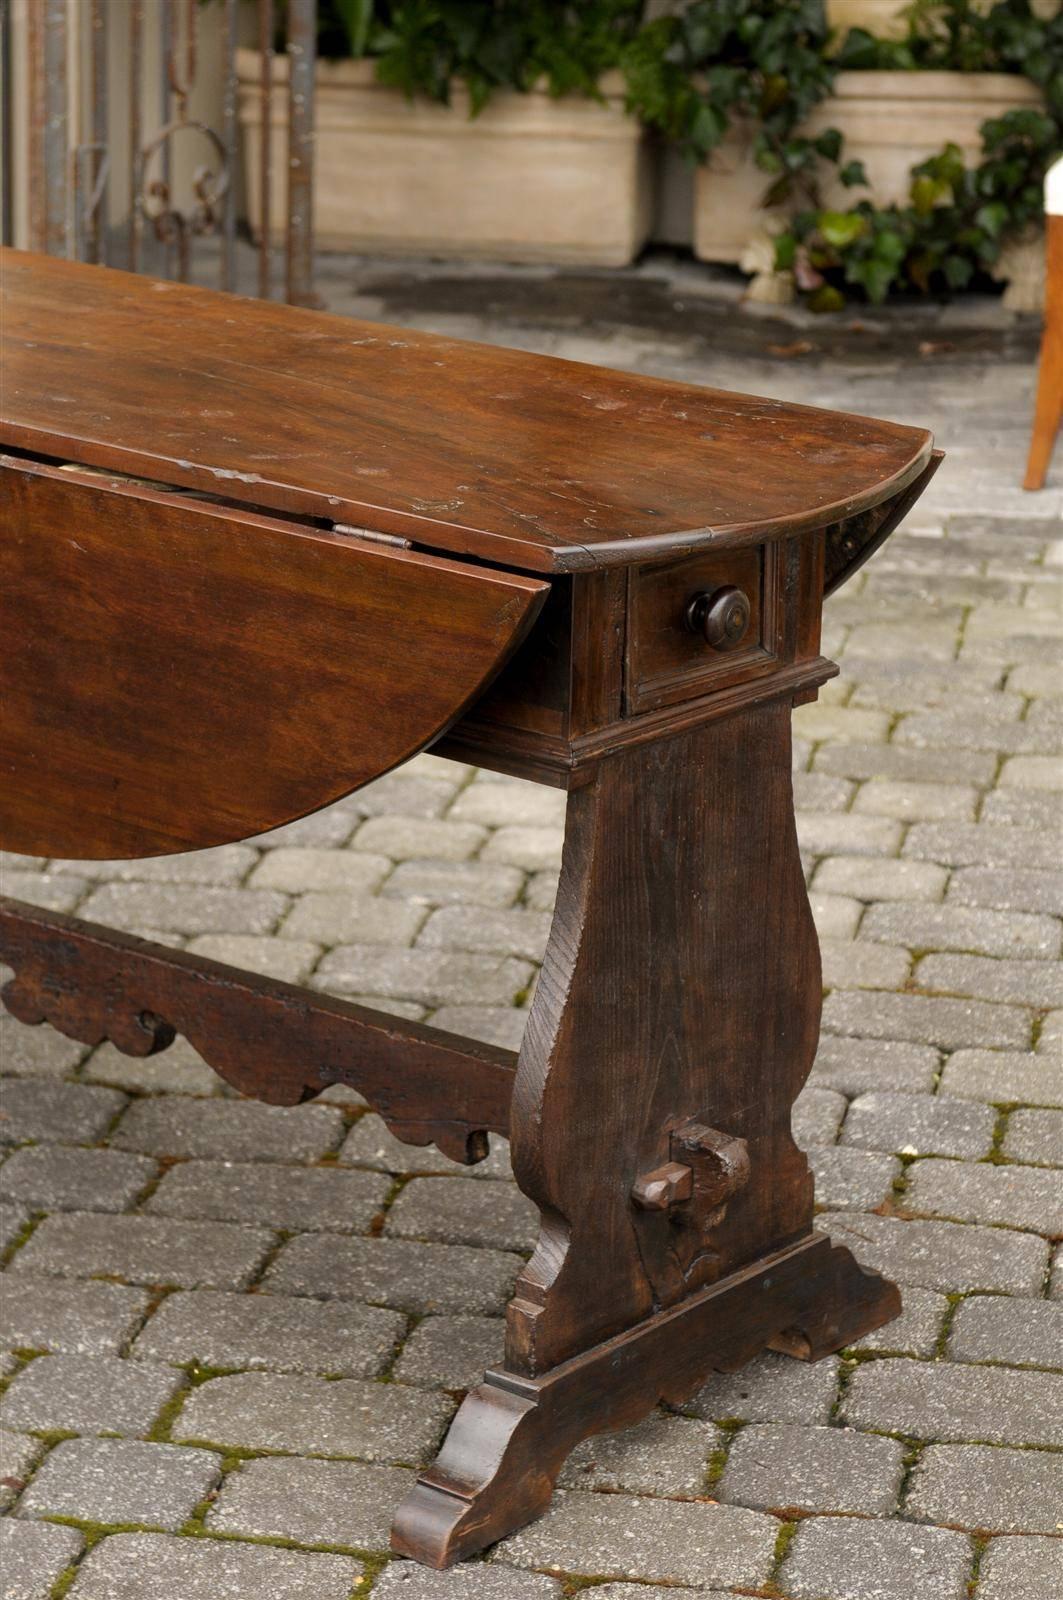 Oval Italian Walnut Drop-Leaf Table from the Late 18th Century with Trestle Base 1